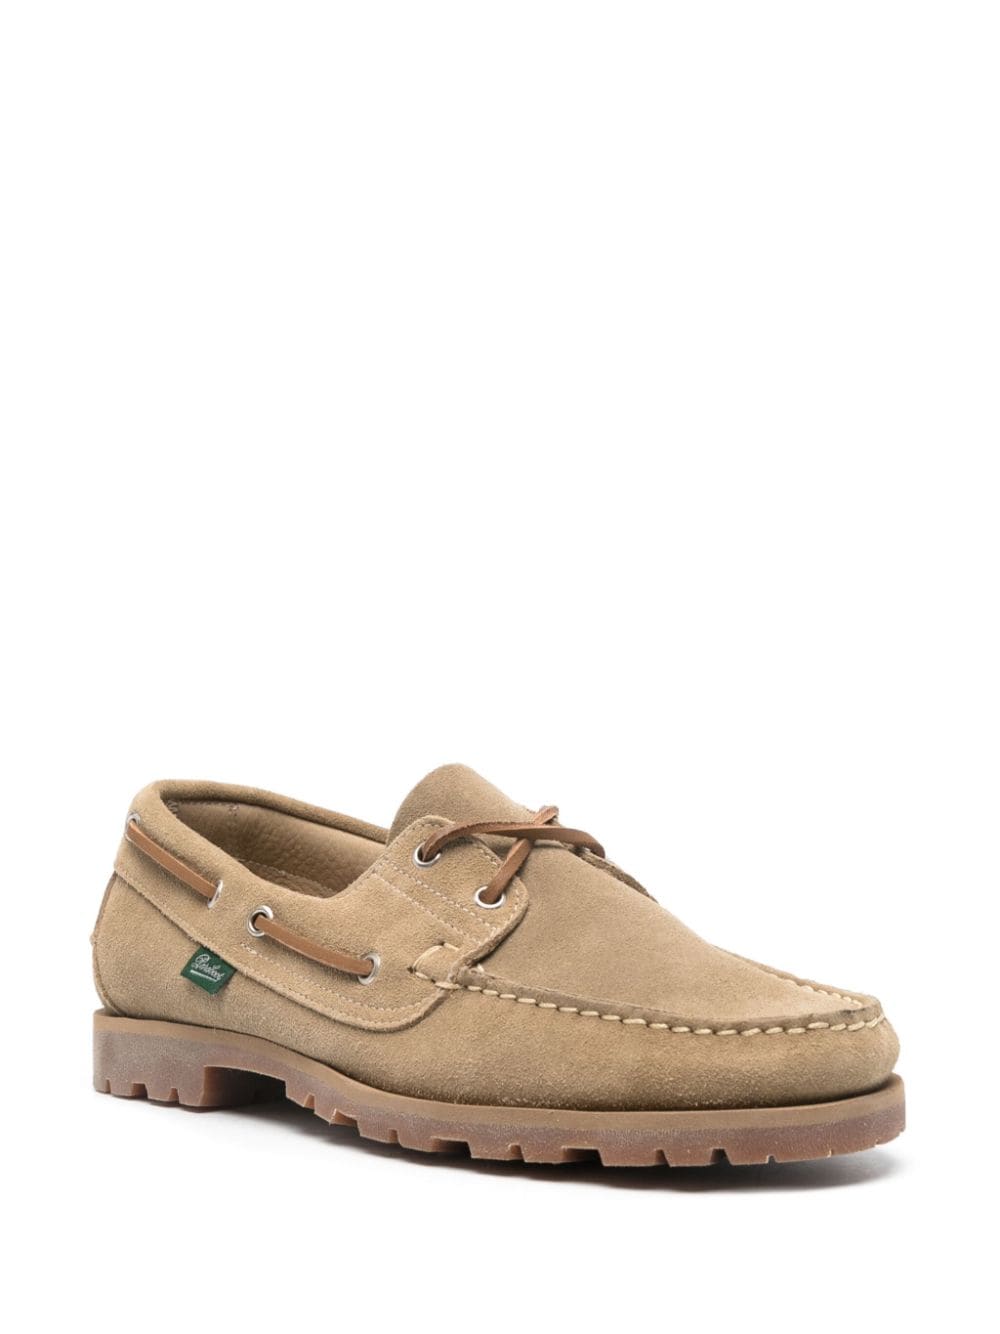 Paraboot Barth suede boat shoes - Beige